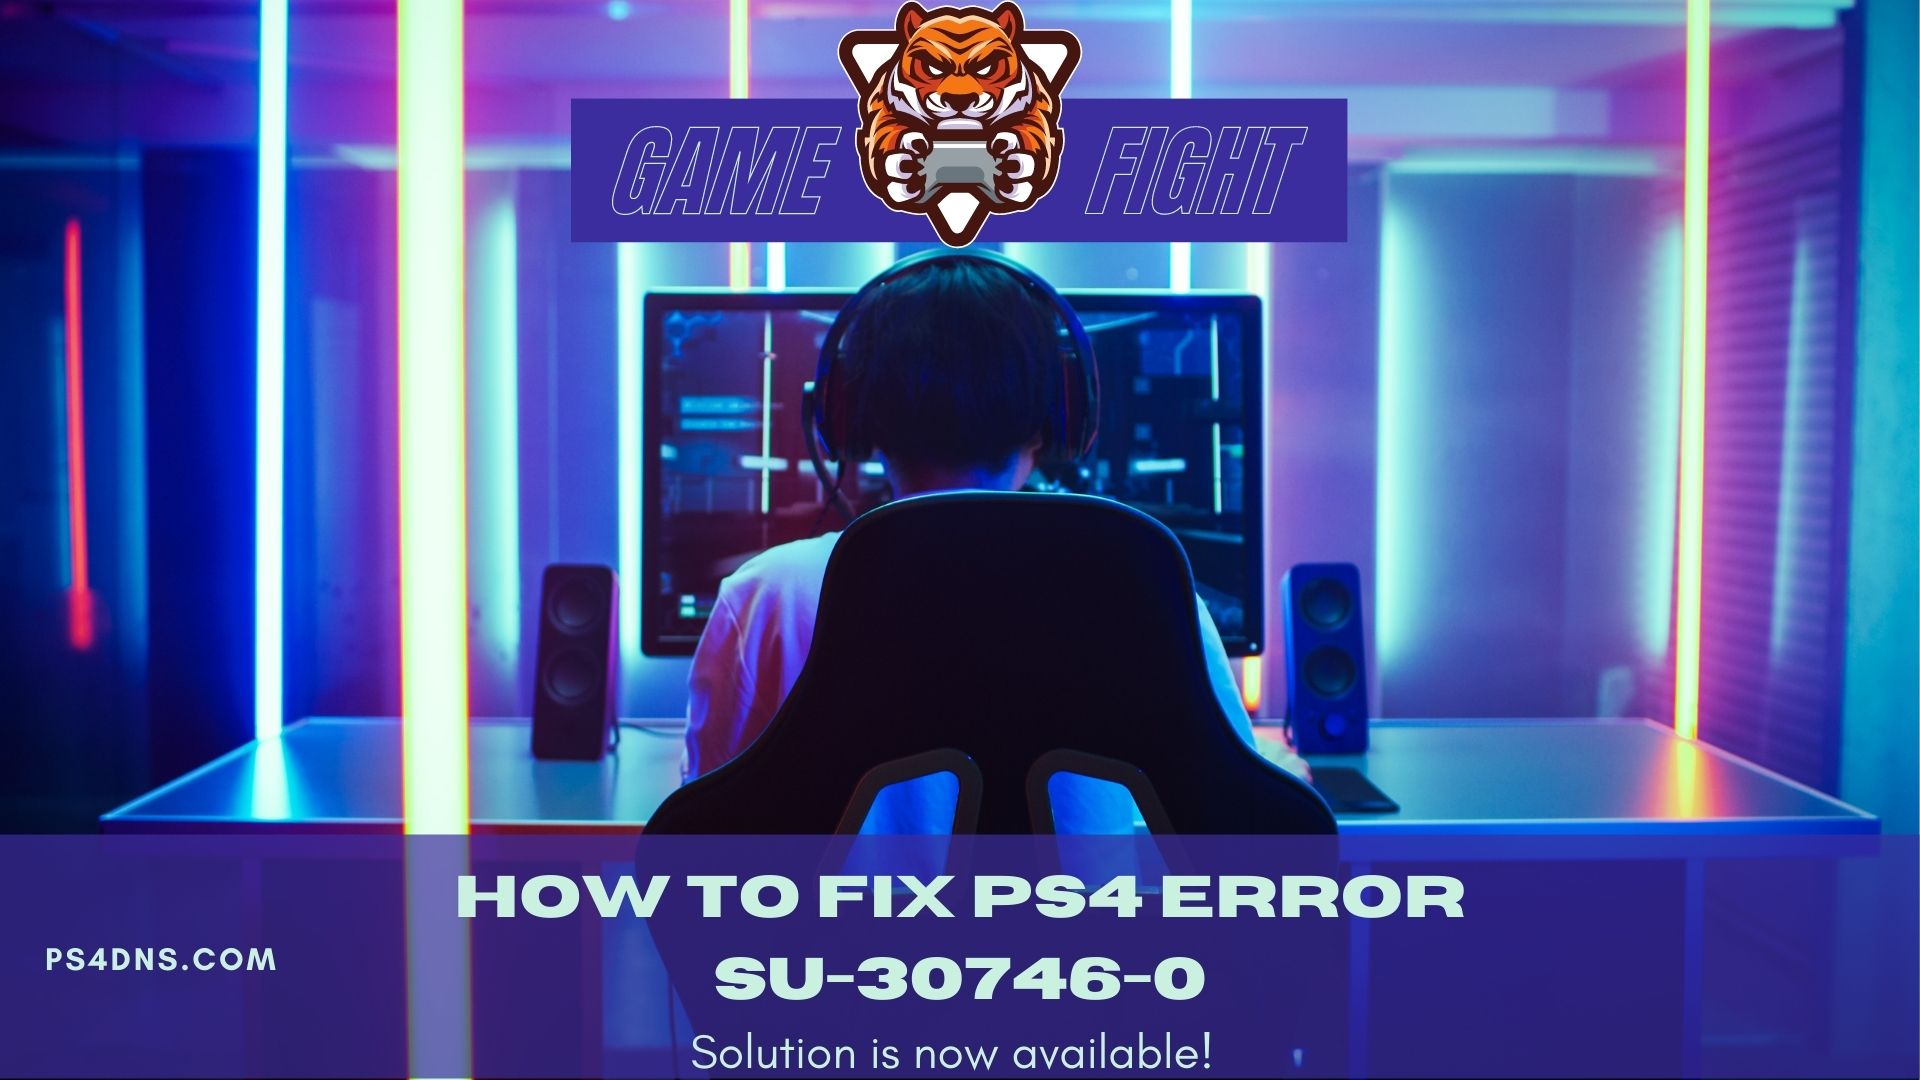 SU-30746-0 is a common error on the PlayStation 4 console that can be frustrating for gamers. In this article, we'll explore the causes of the error, as well as how to troubleshoot and fix it. We'll also address common misconceptions about the error and provide tips for preventing it from happening in the future. So, if you're struggling with the SU-30746-0 error on your PS4, read on for helpful solutions.